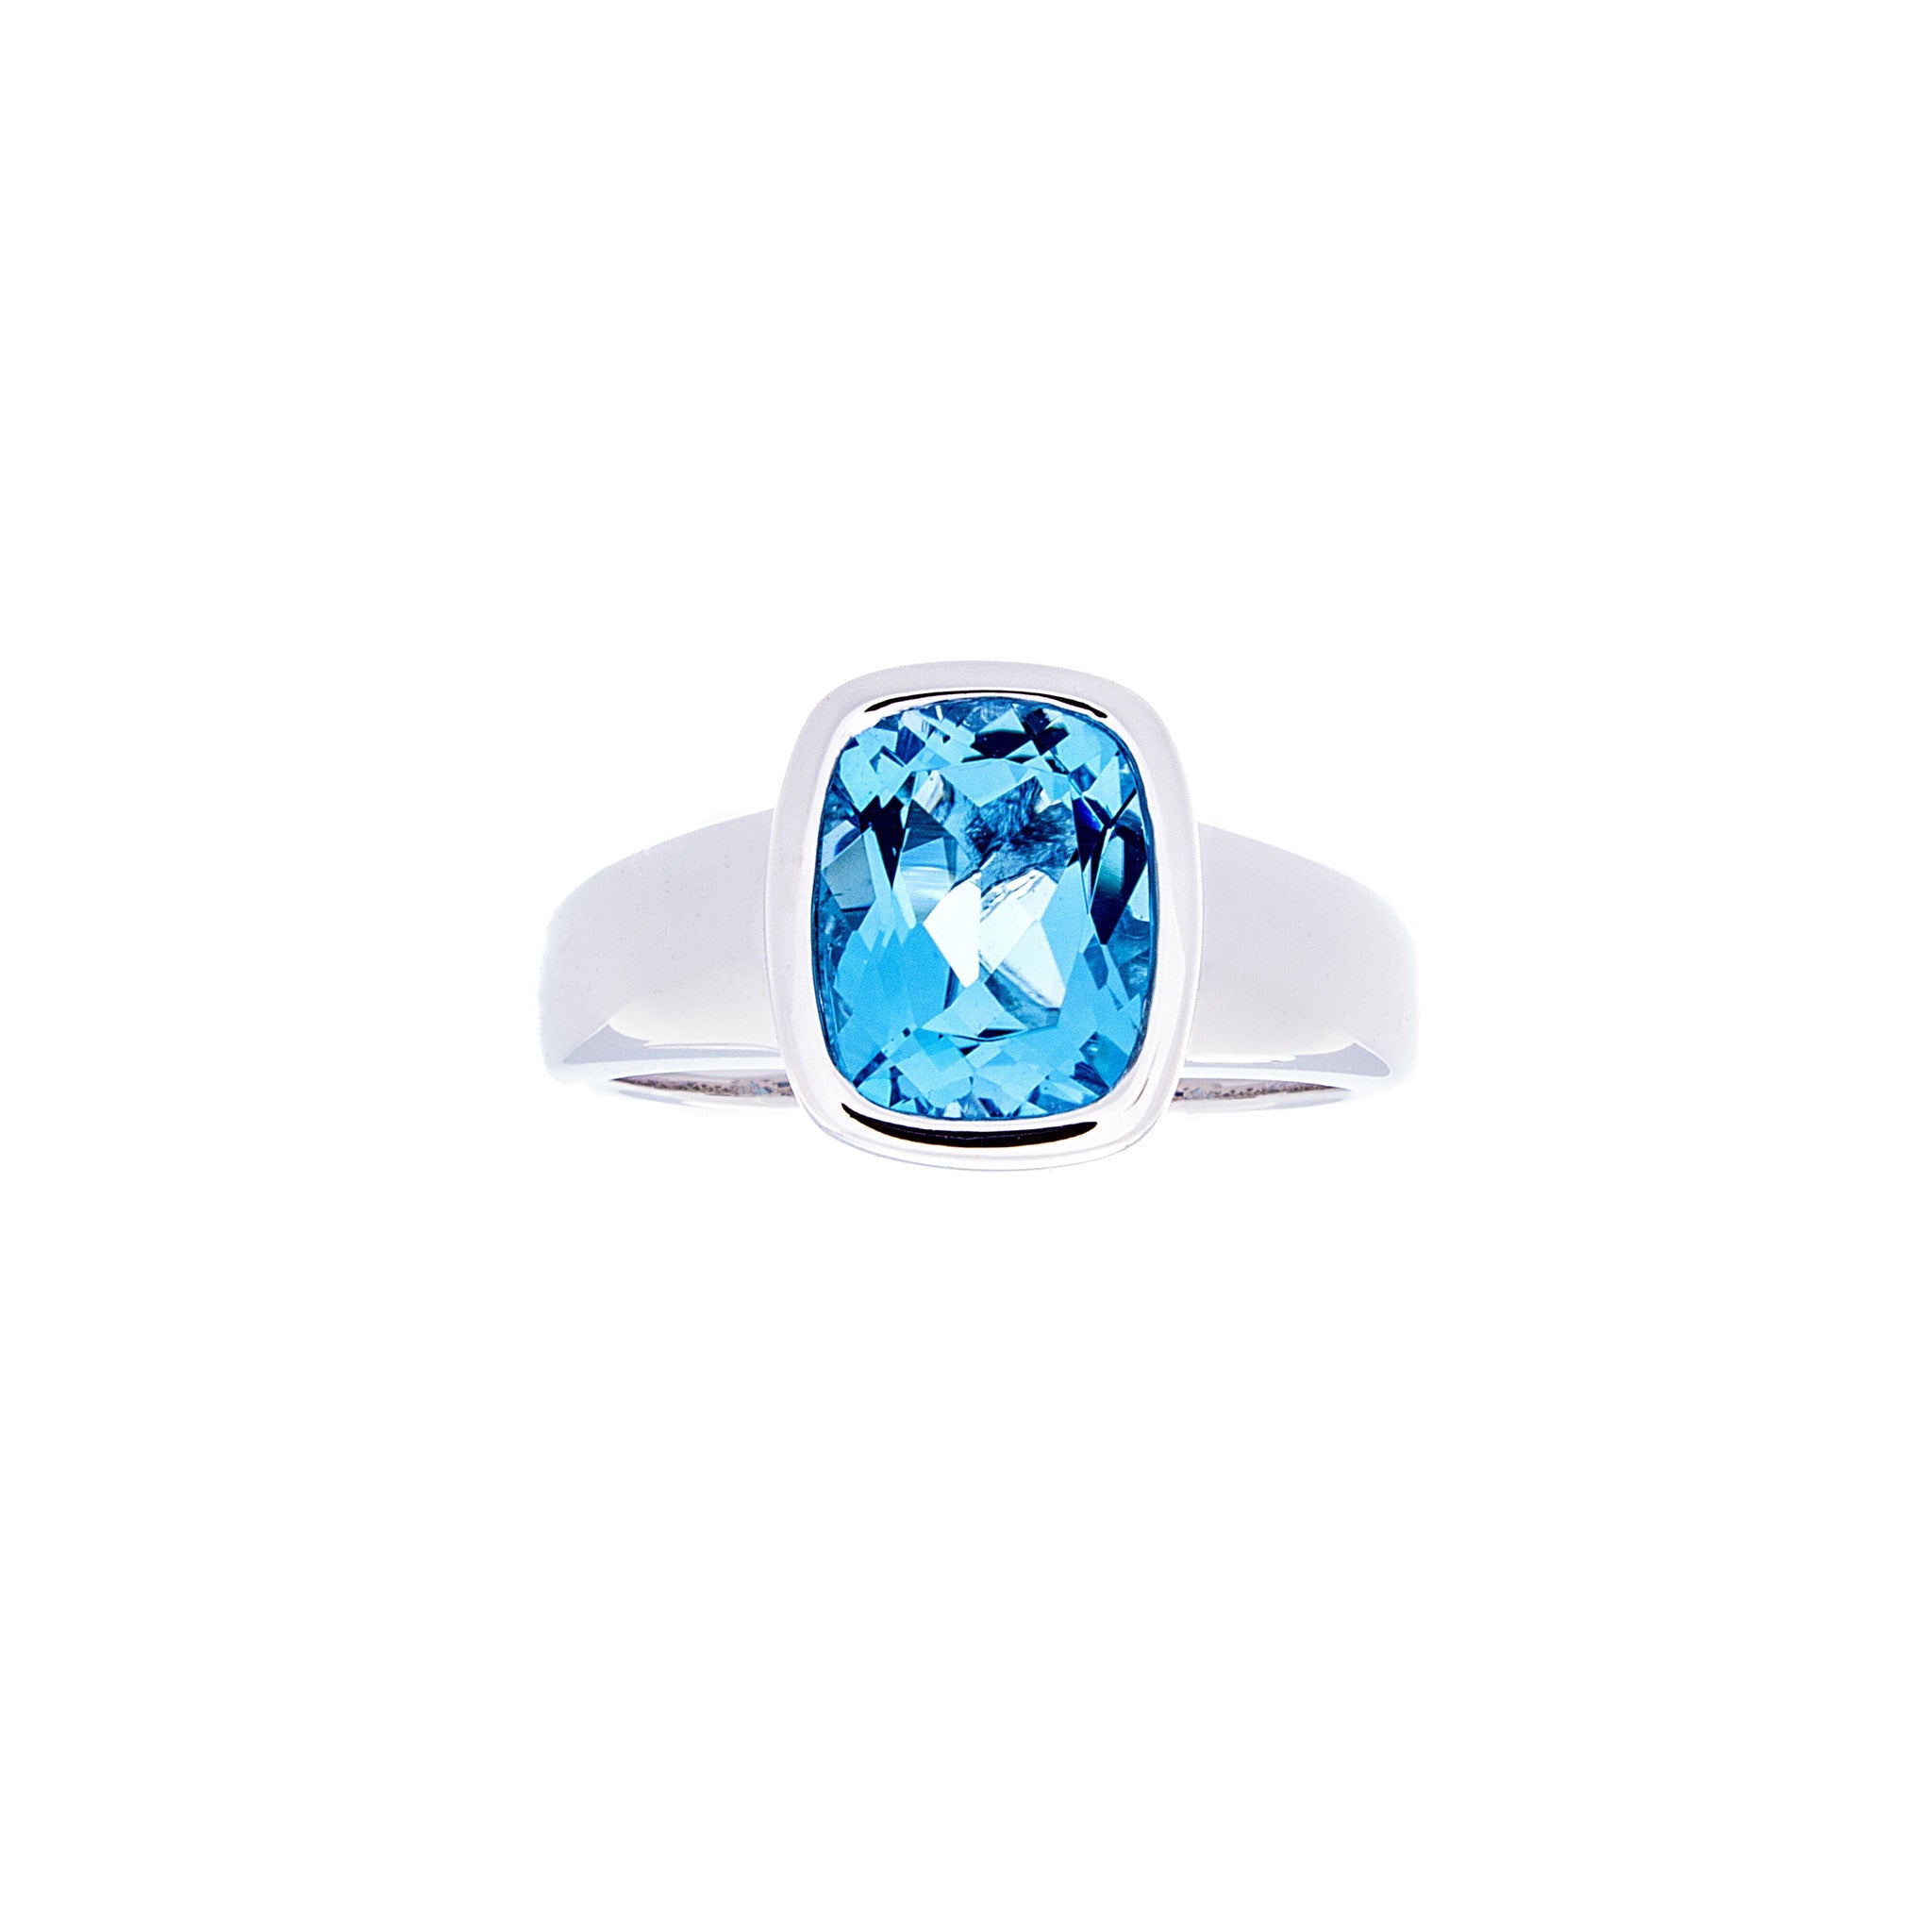 Blue Topaz Gold Ring - Isaac Westman - 2